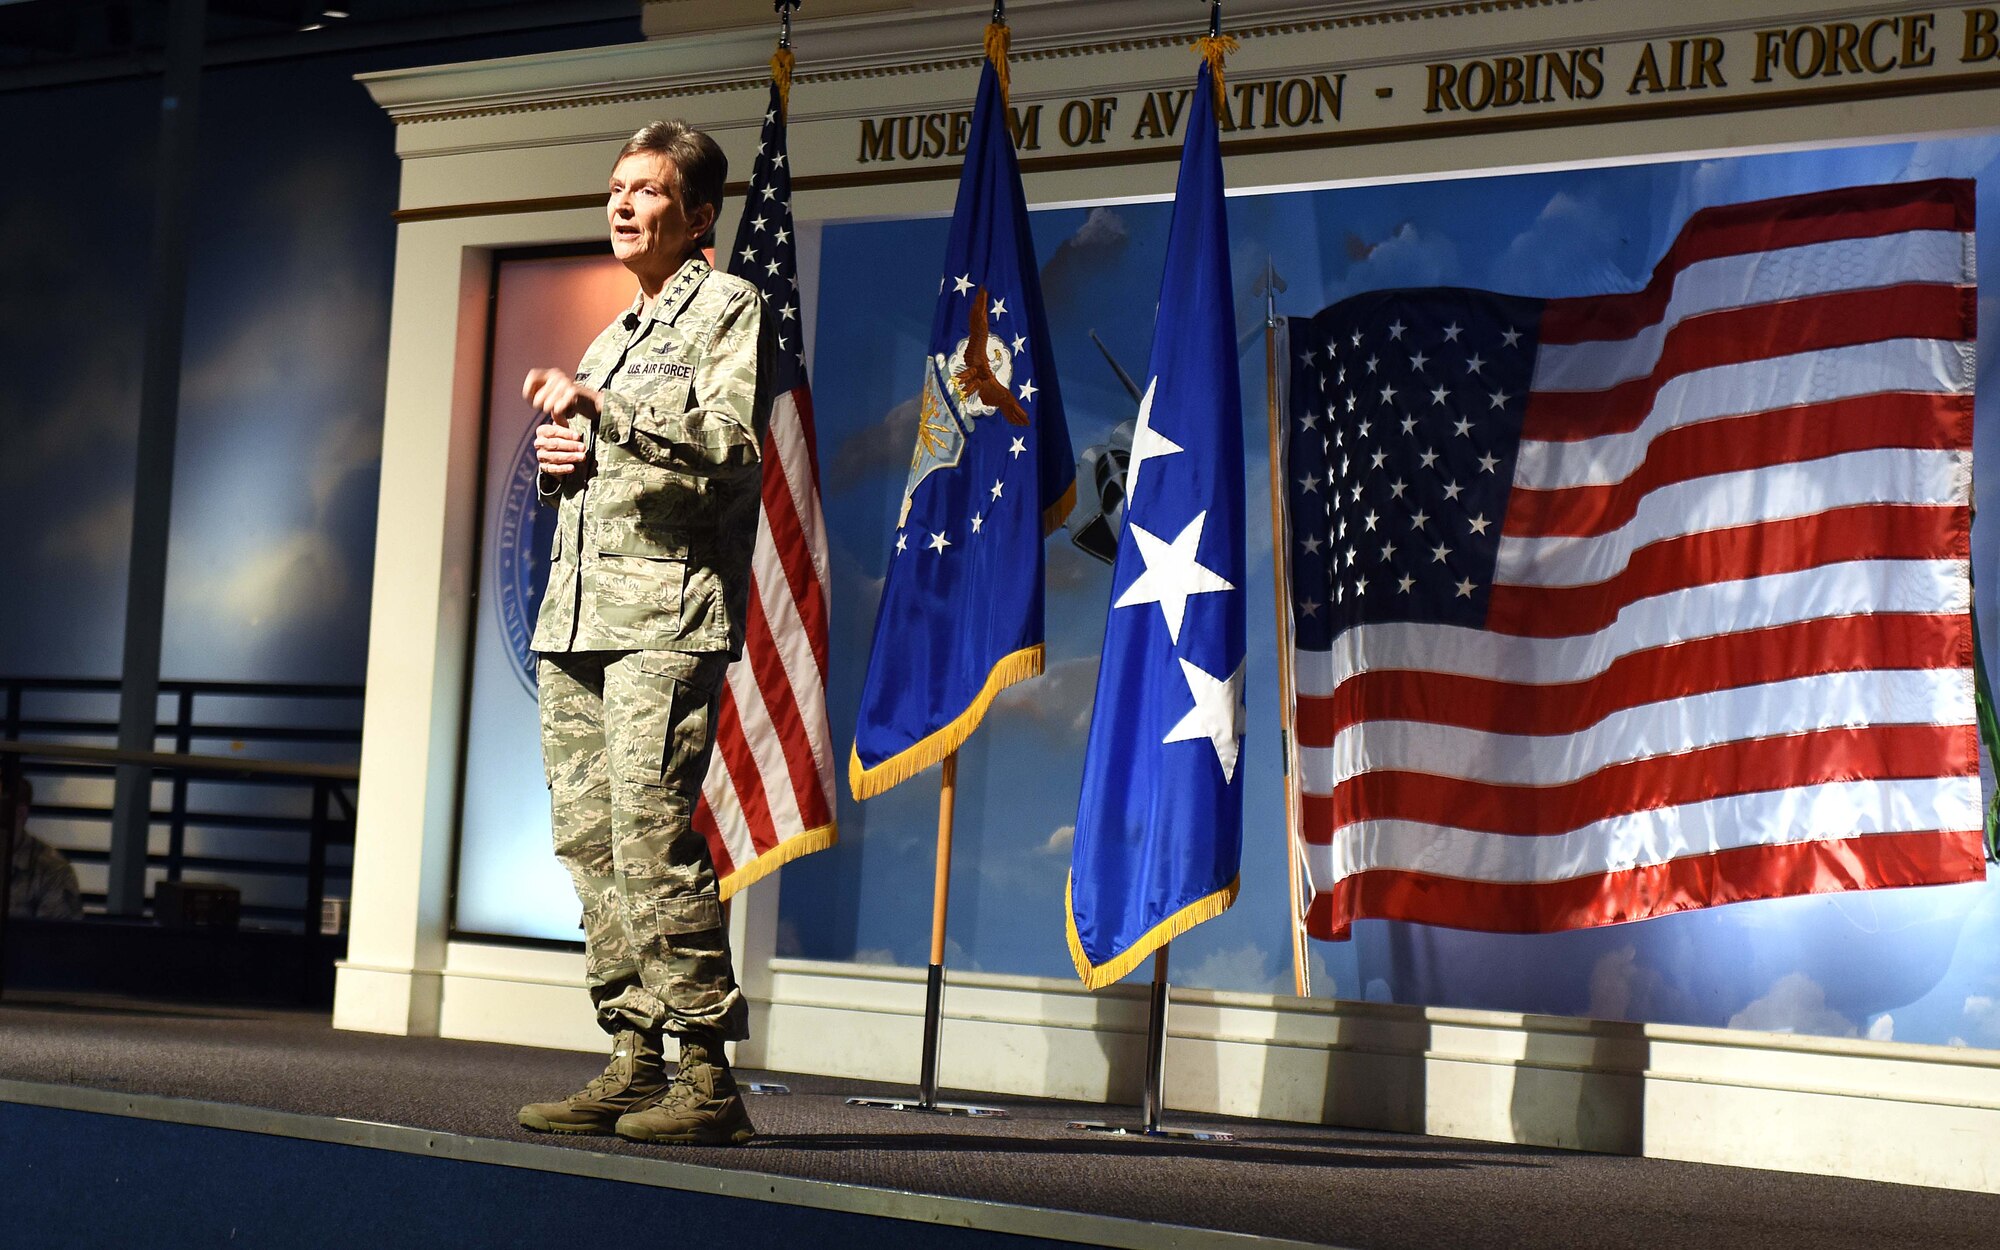 Gen. Ellen Pawlikowski, Air Force Materiel Command commander, speaks to members of Team Robins during her commanders call at the Museum of Aviation Century of Flight Hangar Jan. 18, 2017. During the commanders call, the general discussed the AFMC Strategic Plan, released in 2016, which established the following four goals: Increase AFMC's agility in order to best support the Air Force enterprise; Bolster trust and confidence of those AFMC serves; Drive cost-effectiveness into the capabilities the command provides; and, Recruit, develop and retain a diverse, high-performing and resilient team. In closing the general told the audience, "Thanks for what you do. It makes me proud to be a part of Air Force Materiel Command." (U.S. Air Force photo by Tommie Horton)